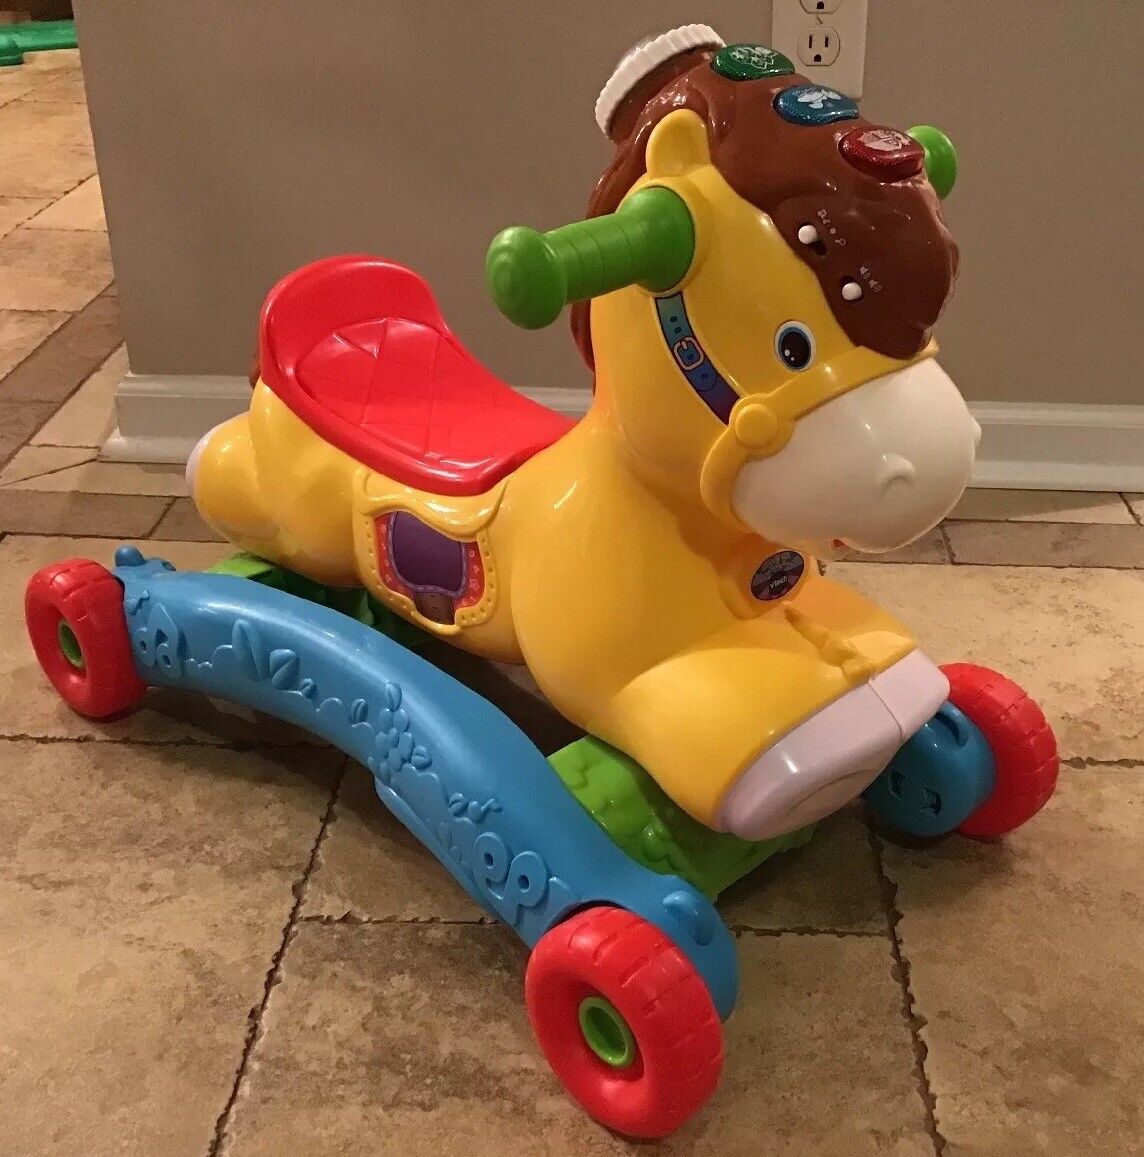 vtech gallop and ride pony